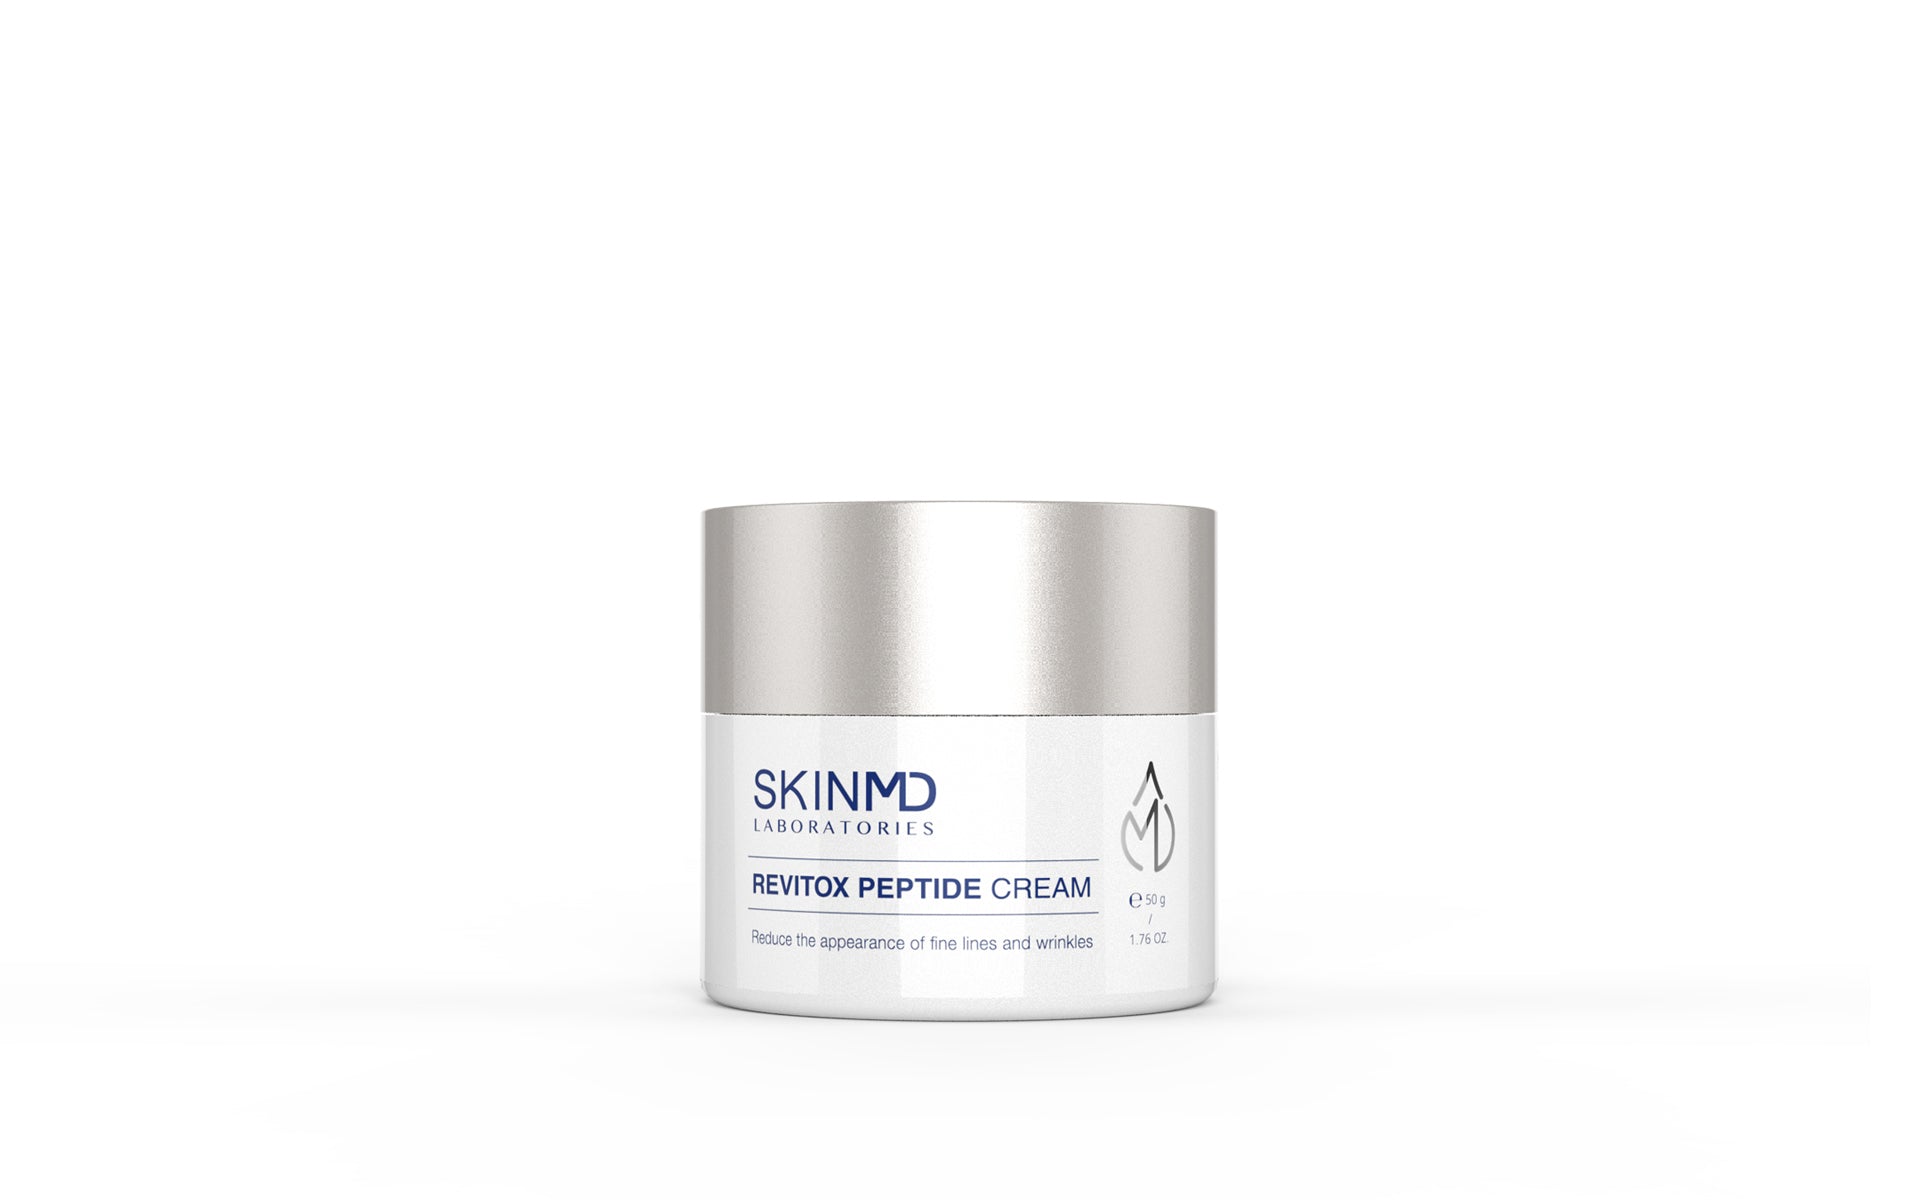 SKINMD LABORATORIES REVITOX PEPTIDE CREAM  high-potency peptide and hydrolyzed collagen promote collagen regeneration and activate stem cells for perfect skin elasticity